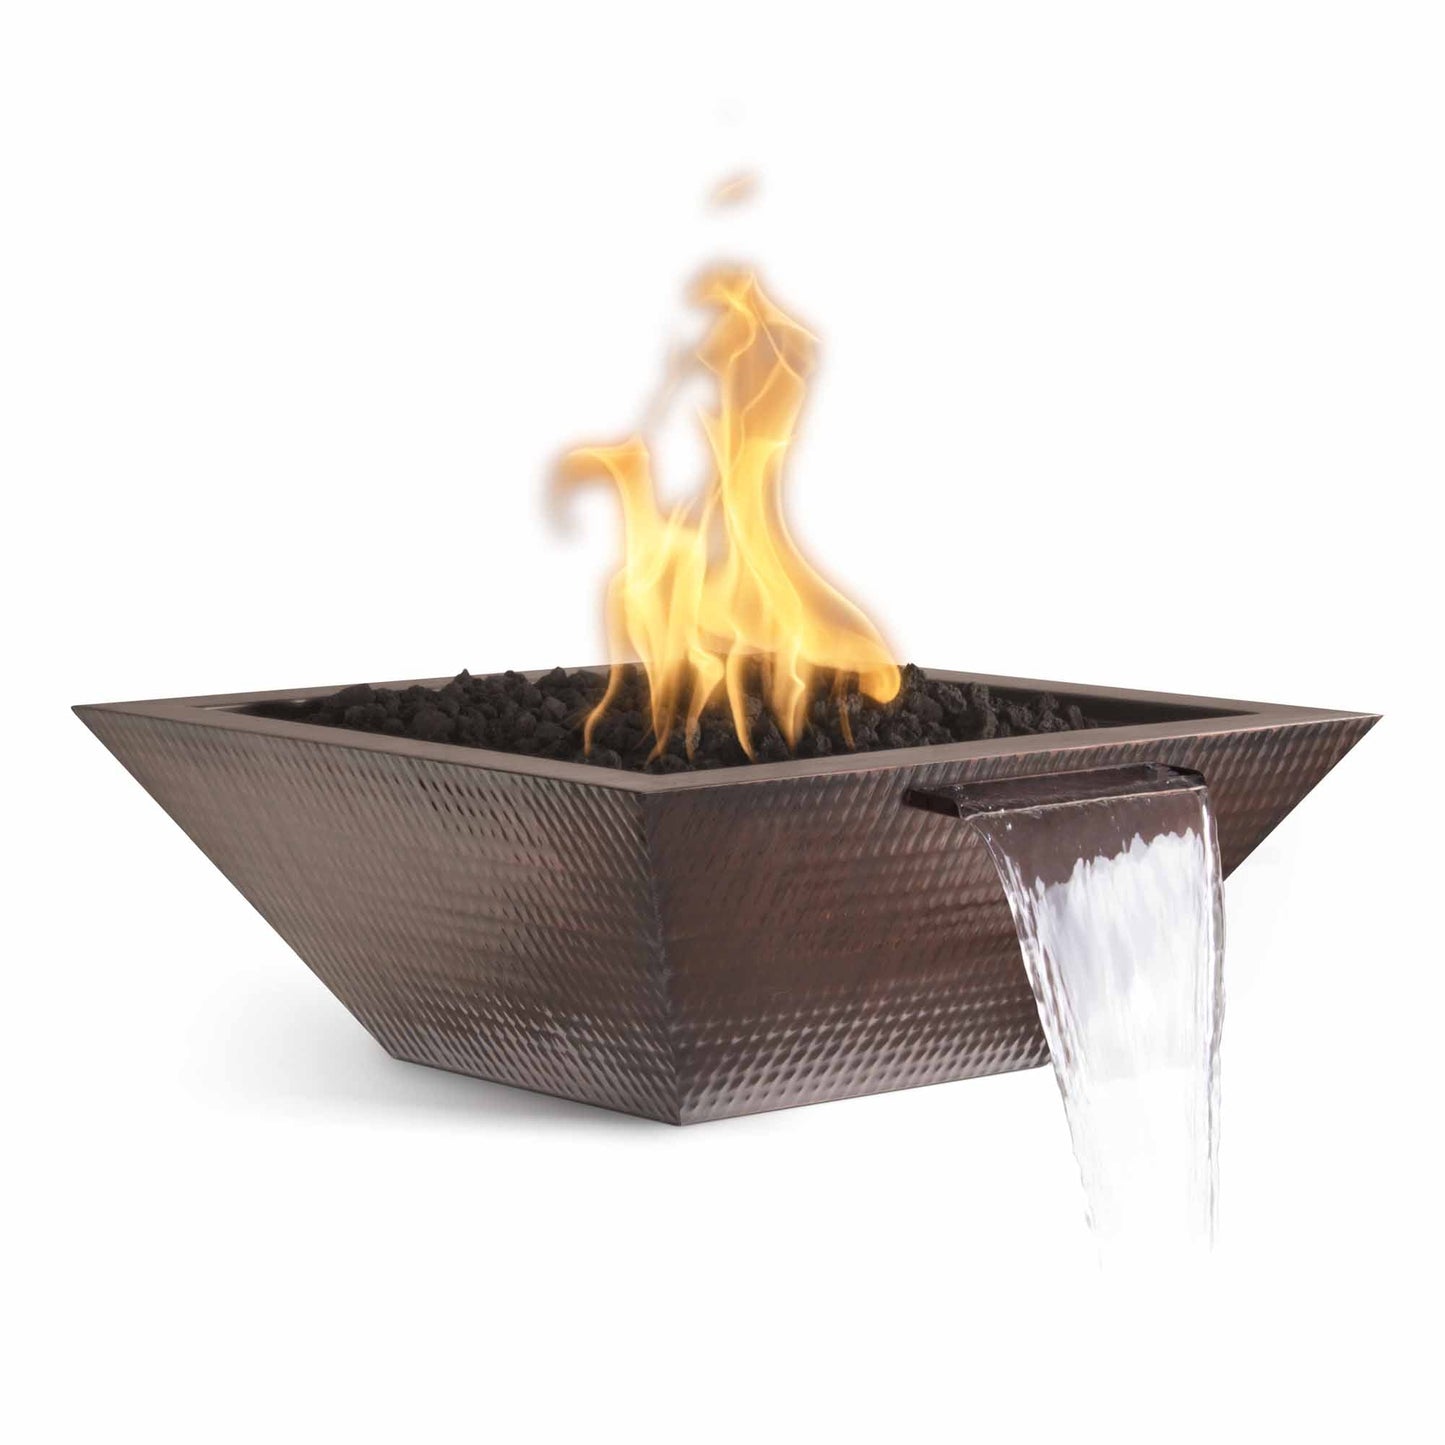 The Outdoor Plus Square Maya 24" Copper Natural Gas Fire & Water Bowl with Match Lit with Flame Sense Ignition